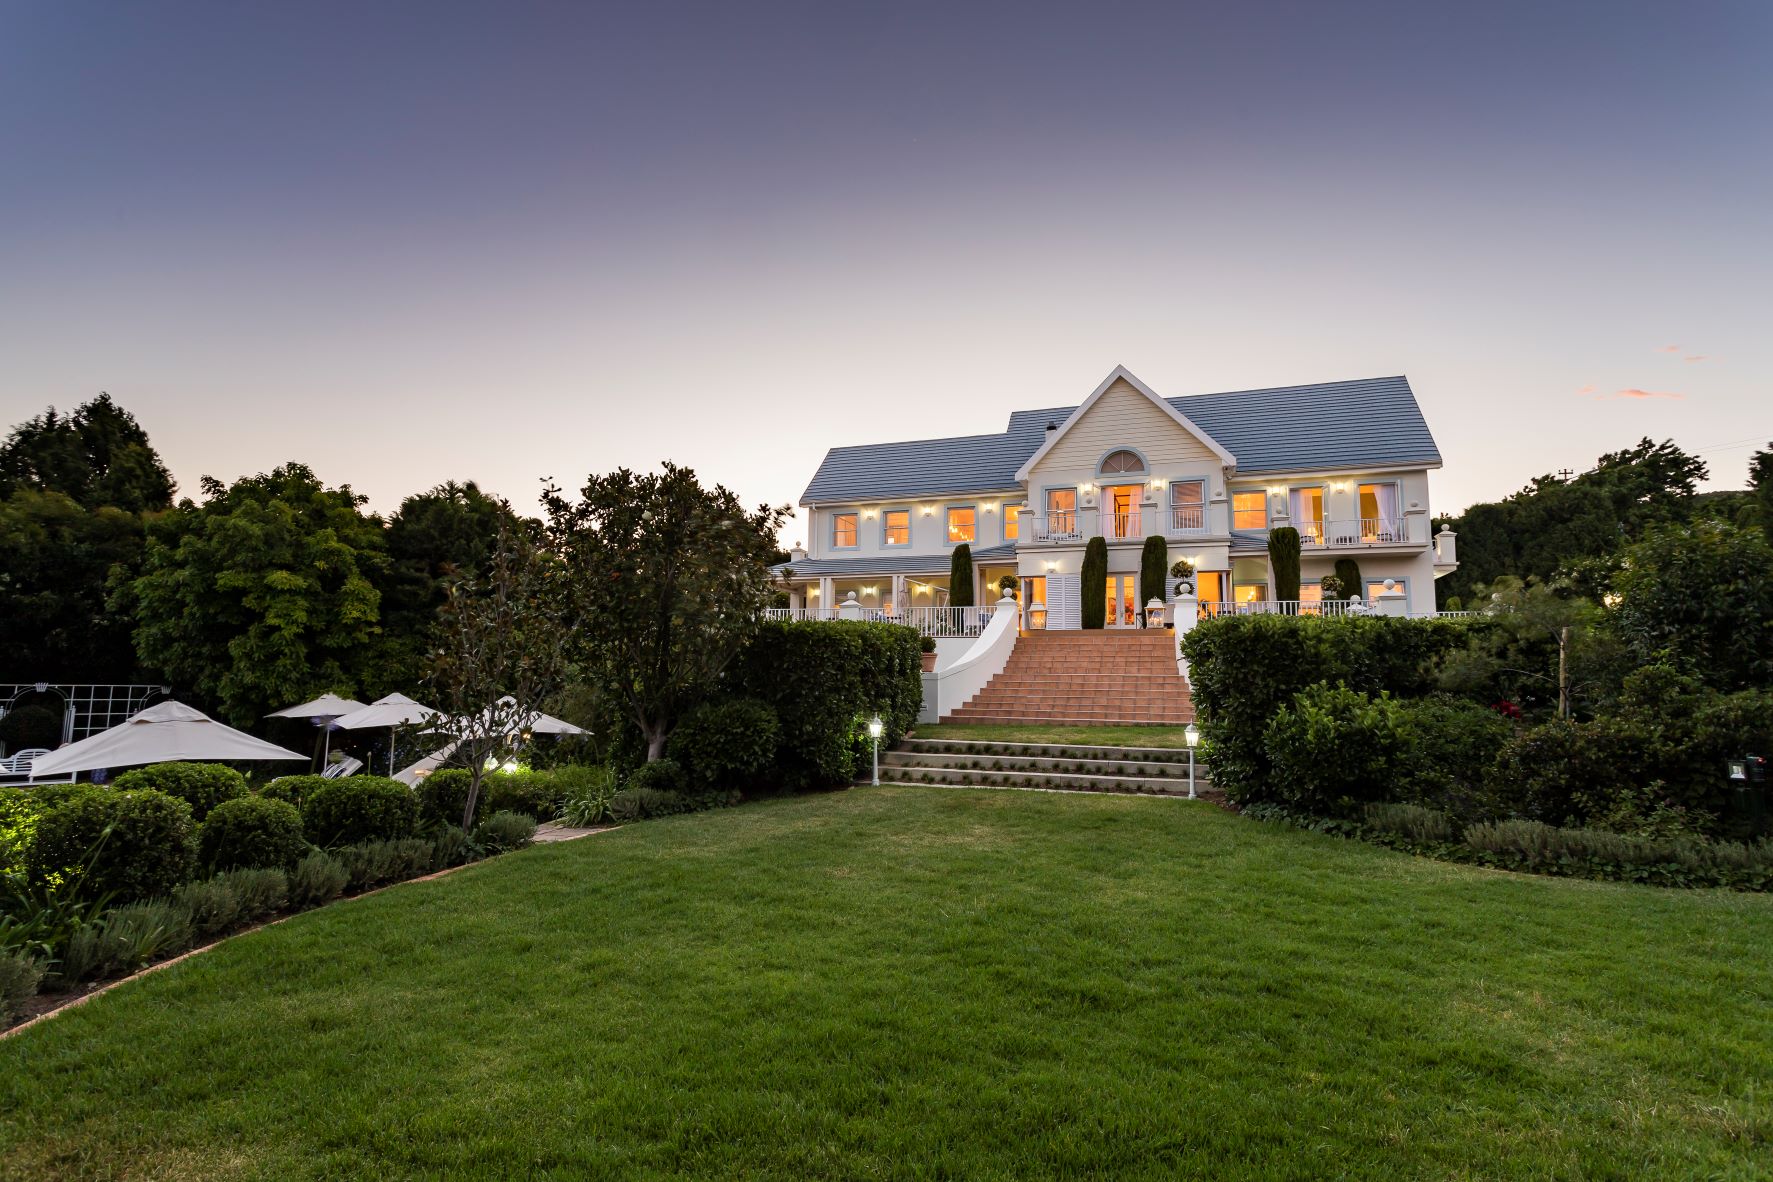 A JEWEL IN THE CAPE WINELANDS